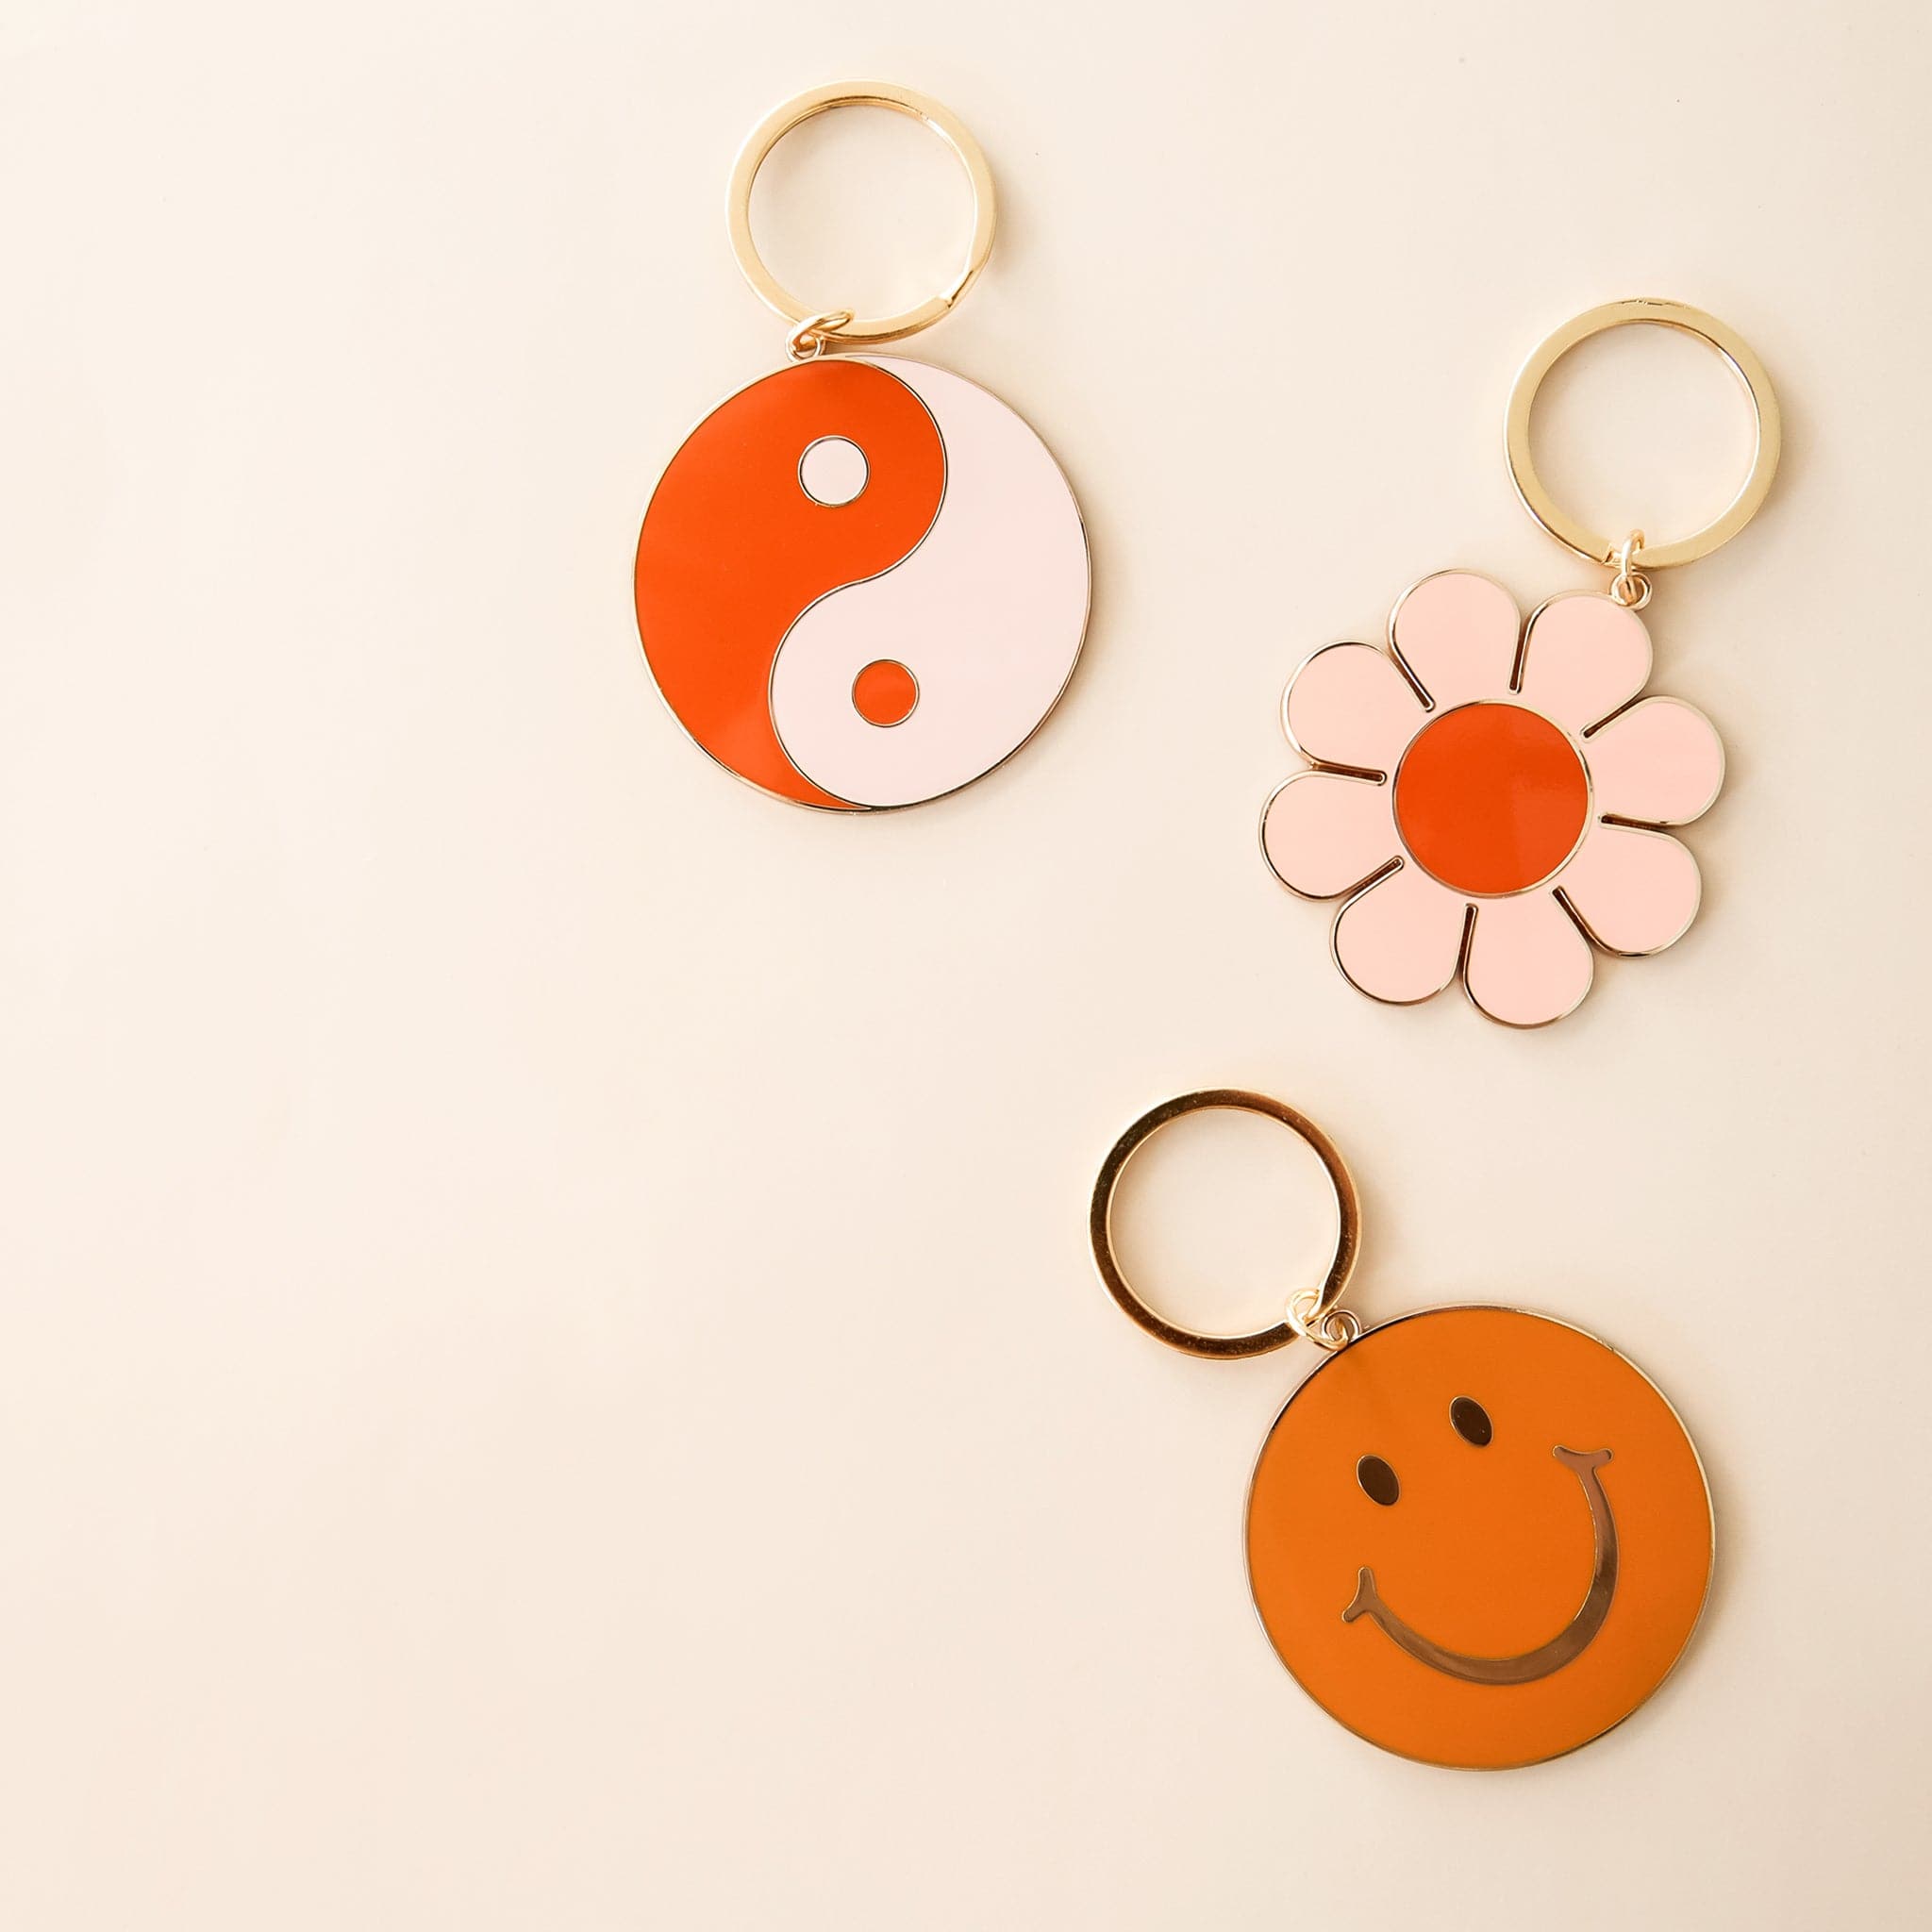 Three keychains including a yin-yang symbol, flower, and smiley face. Each keychain has gold detailing and a golden key ring.